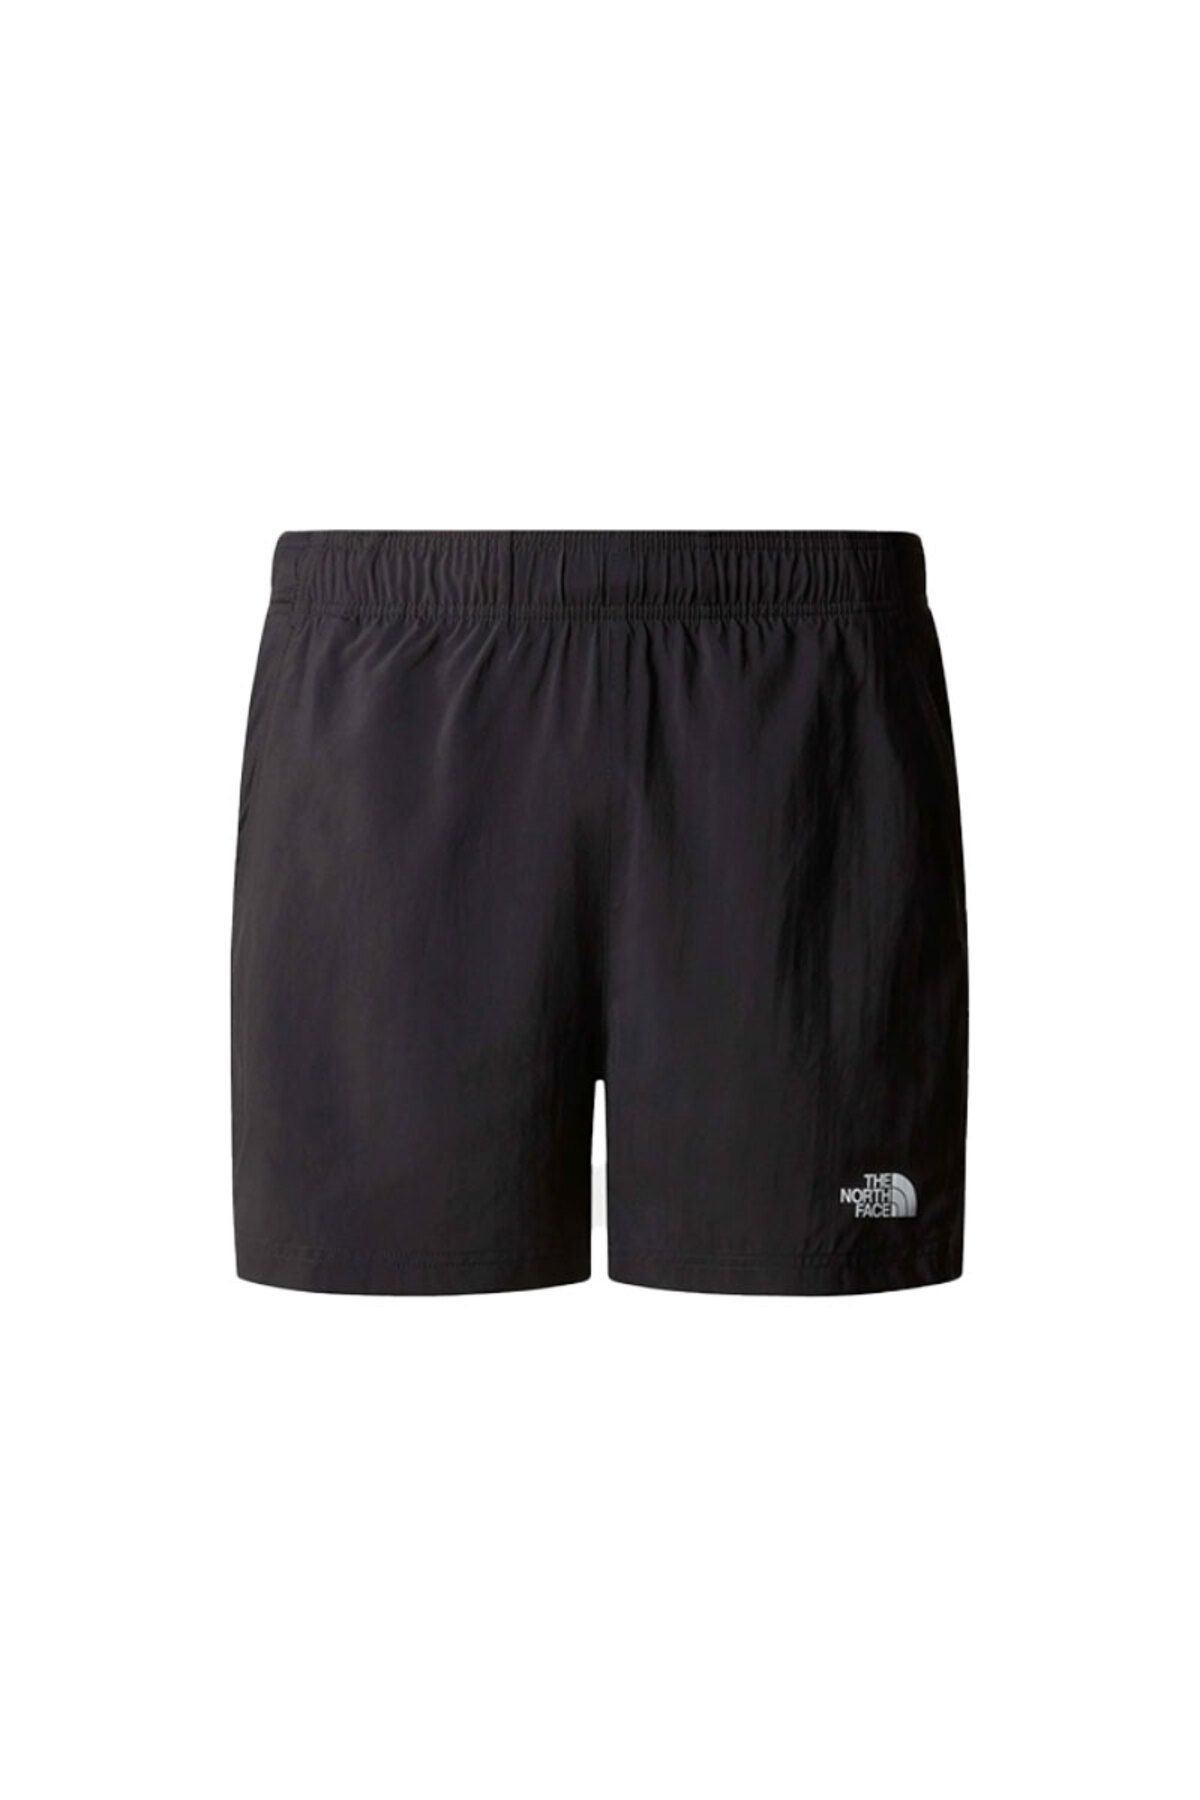 The North Face M 24/7 5'' Shorts